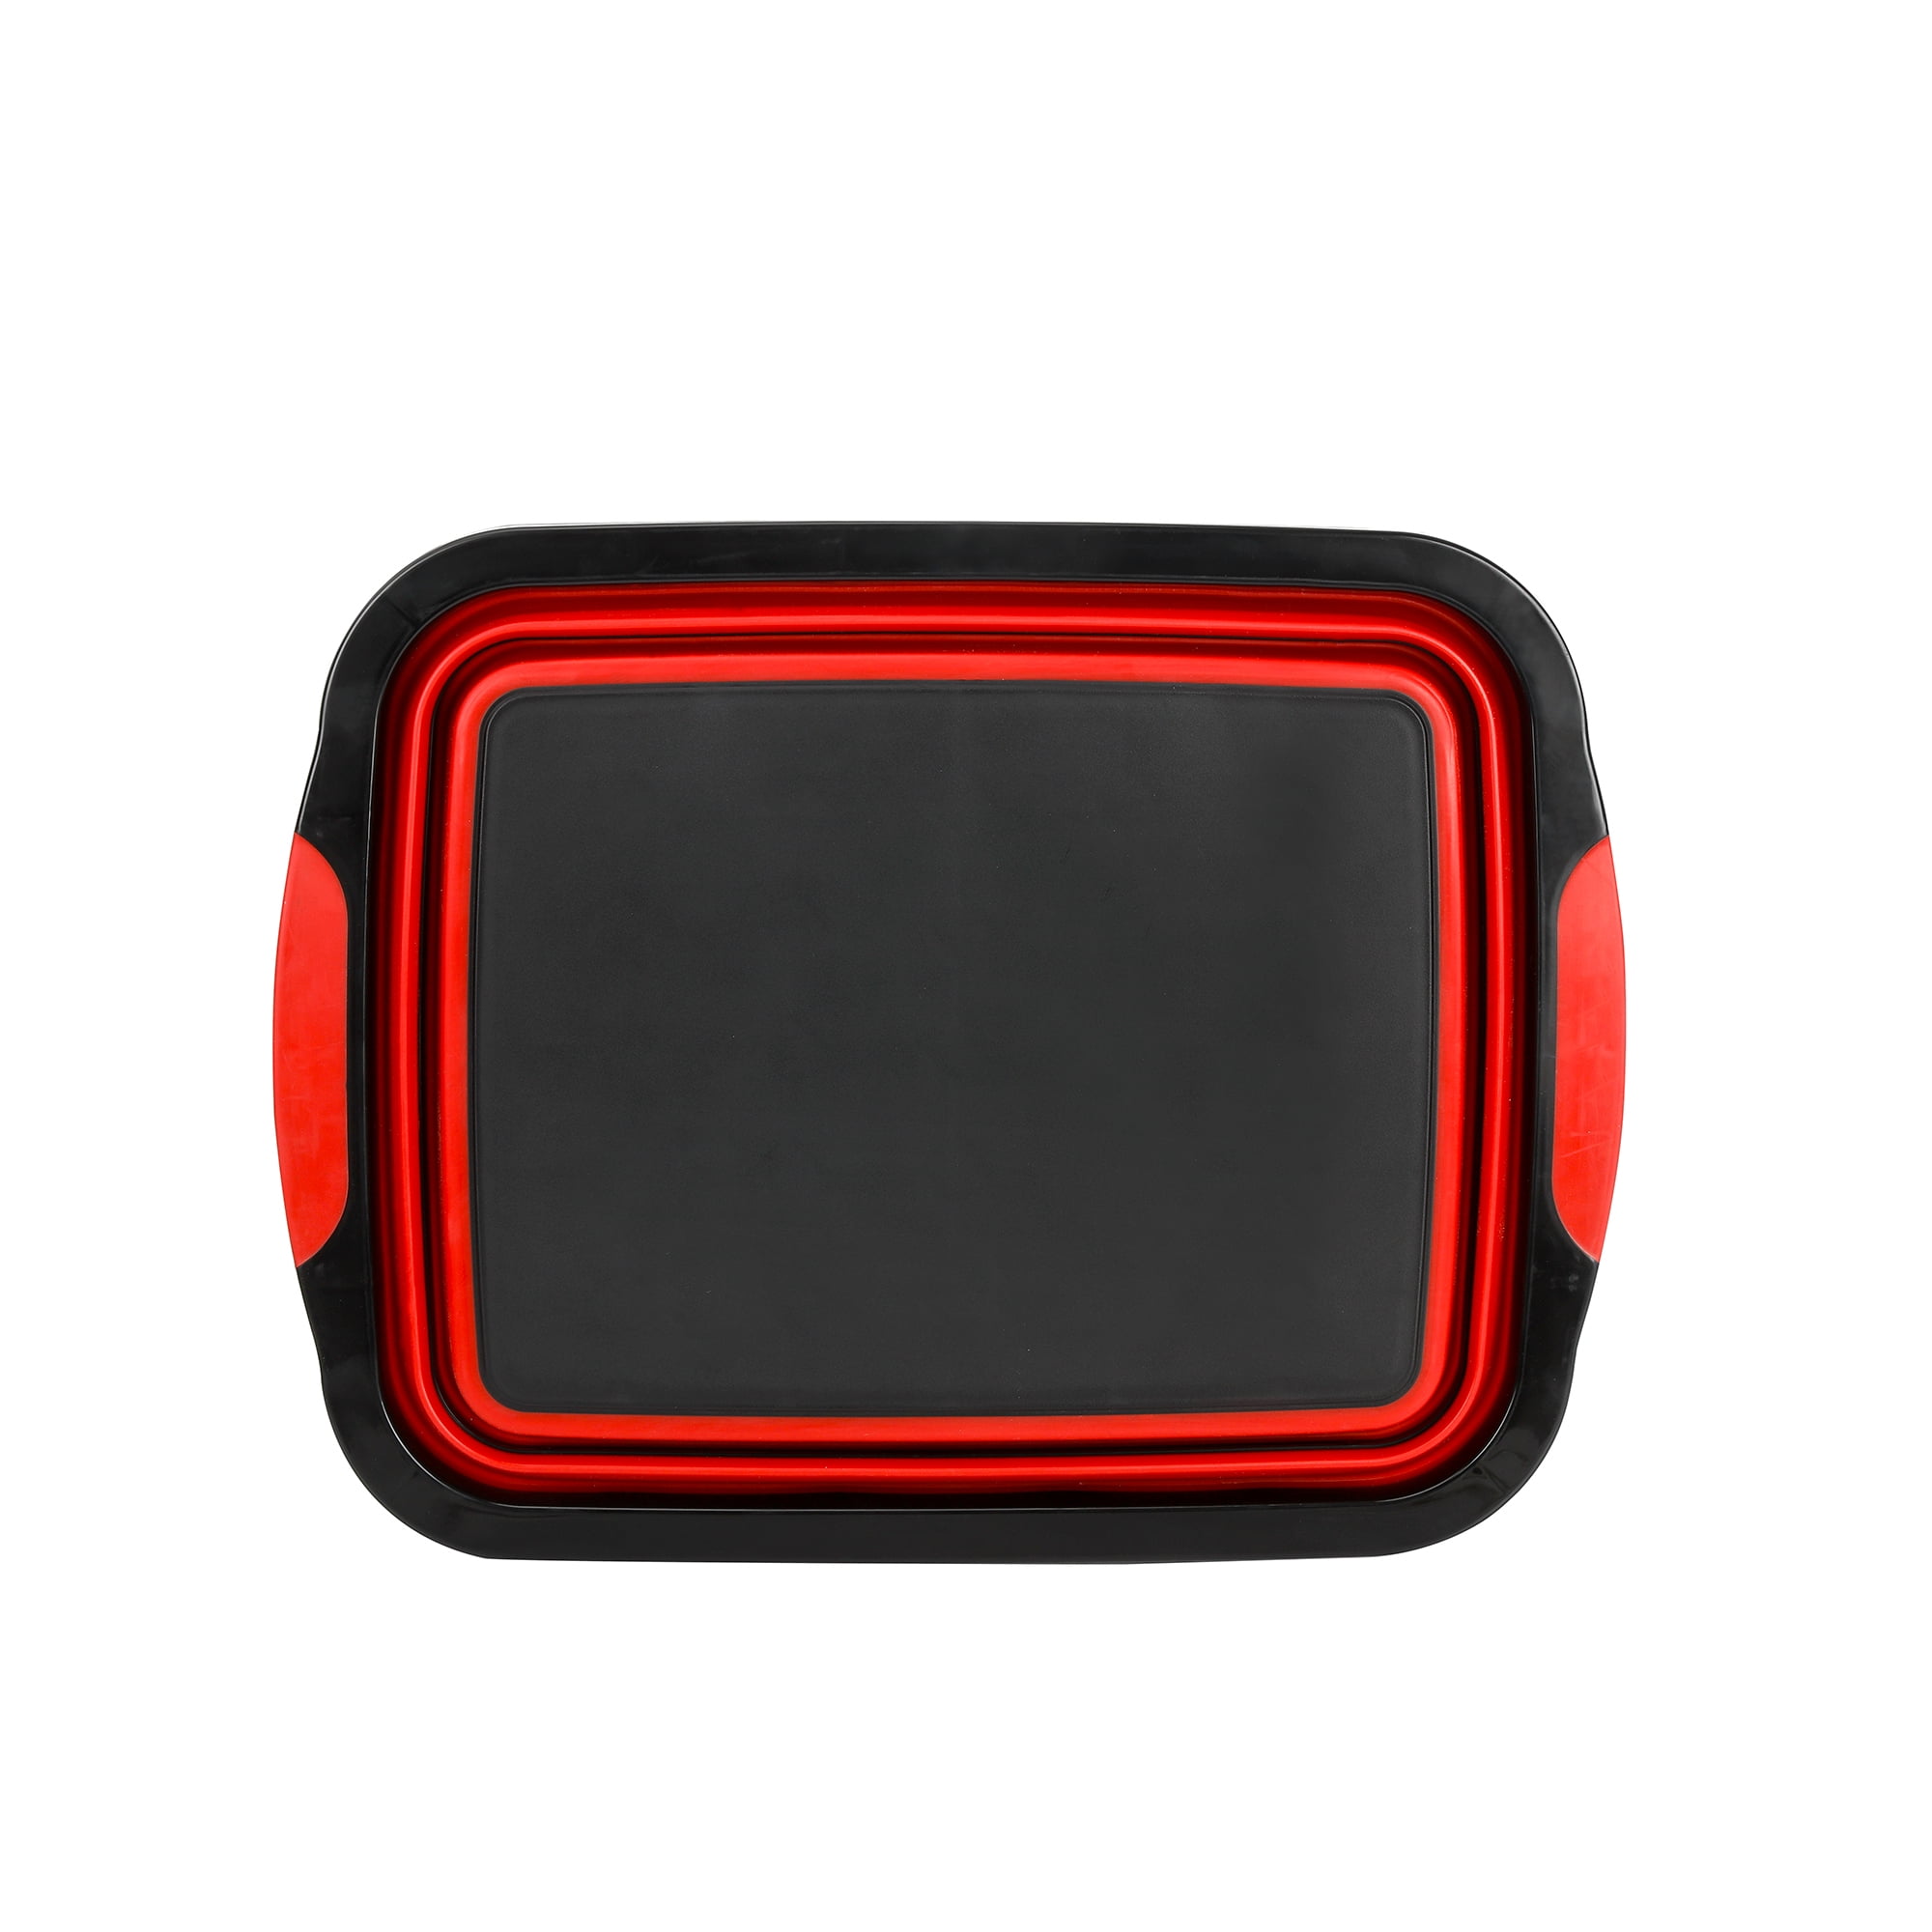 Expert Grill Collapsible Caddy and Cutting Board, Black Red, Dishwasher Safe Plastic, Model 8985, Size: One Size